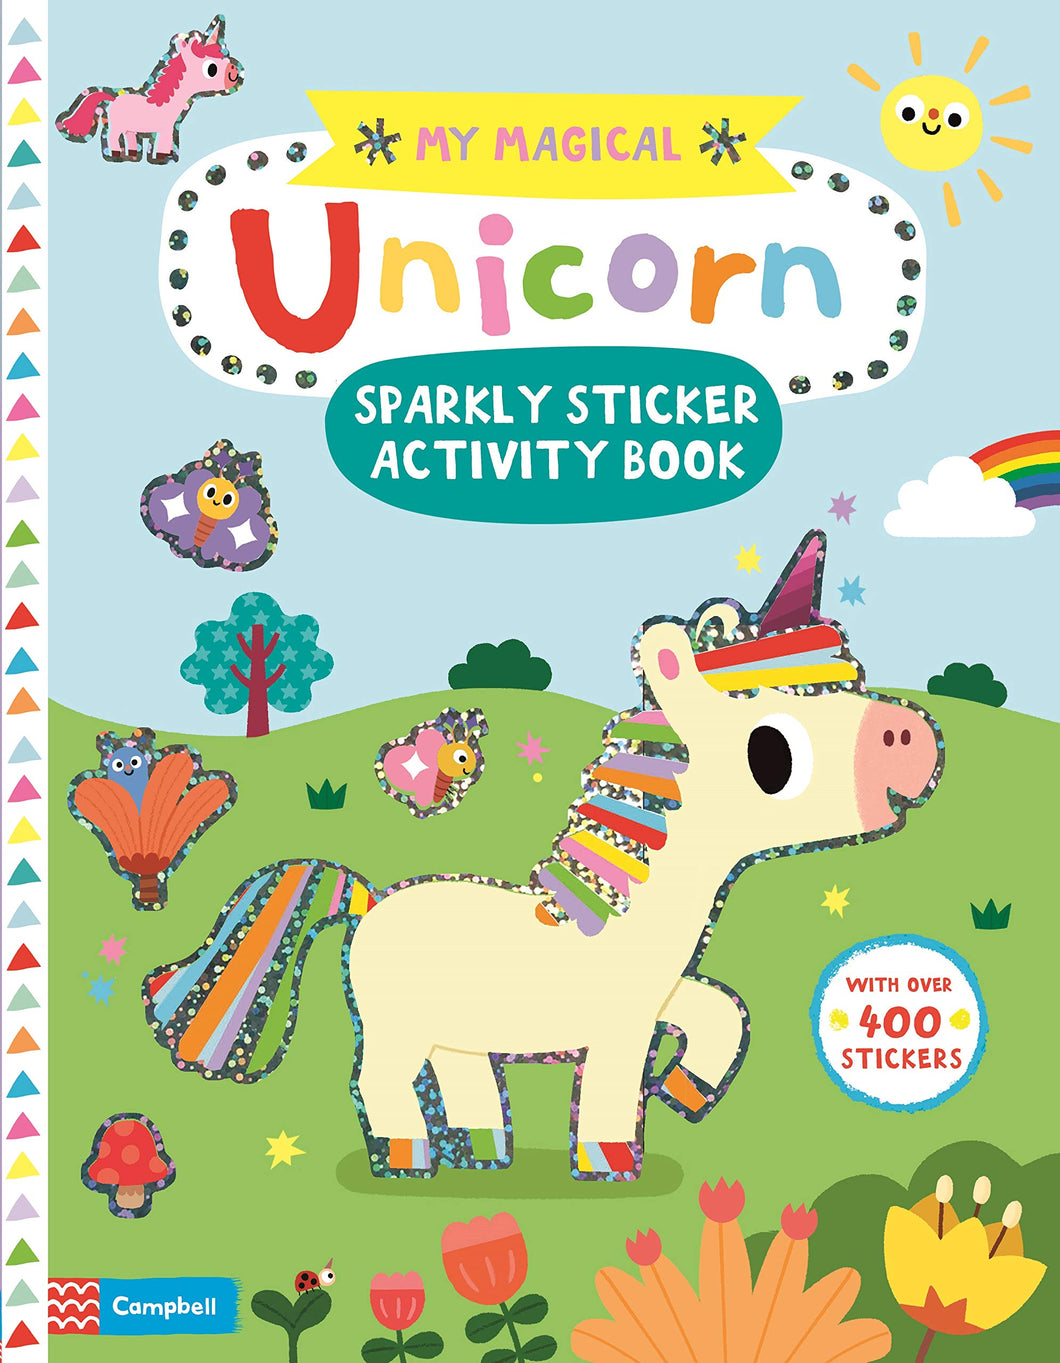 My Magical Unicorn Sparkly Sticker Activity Book [Illustrated by Yujin Shin]